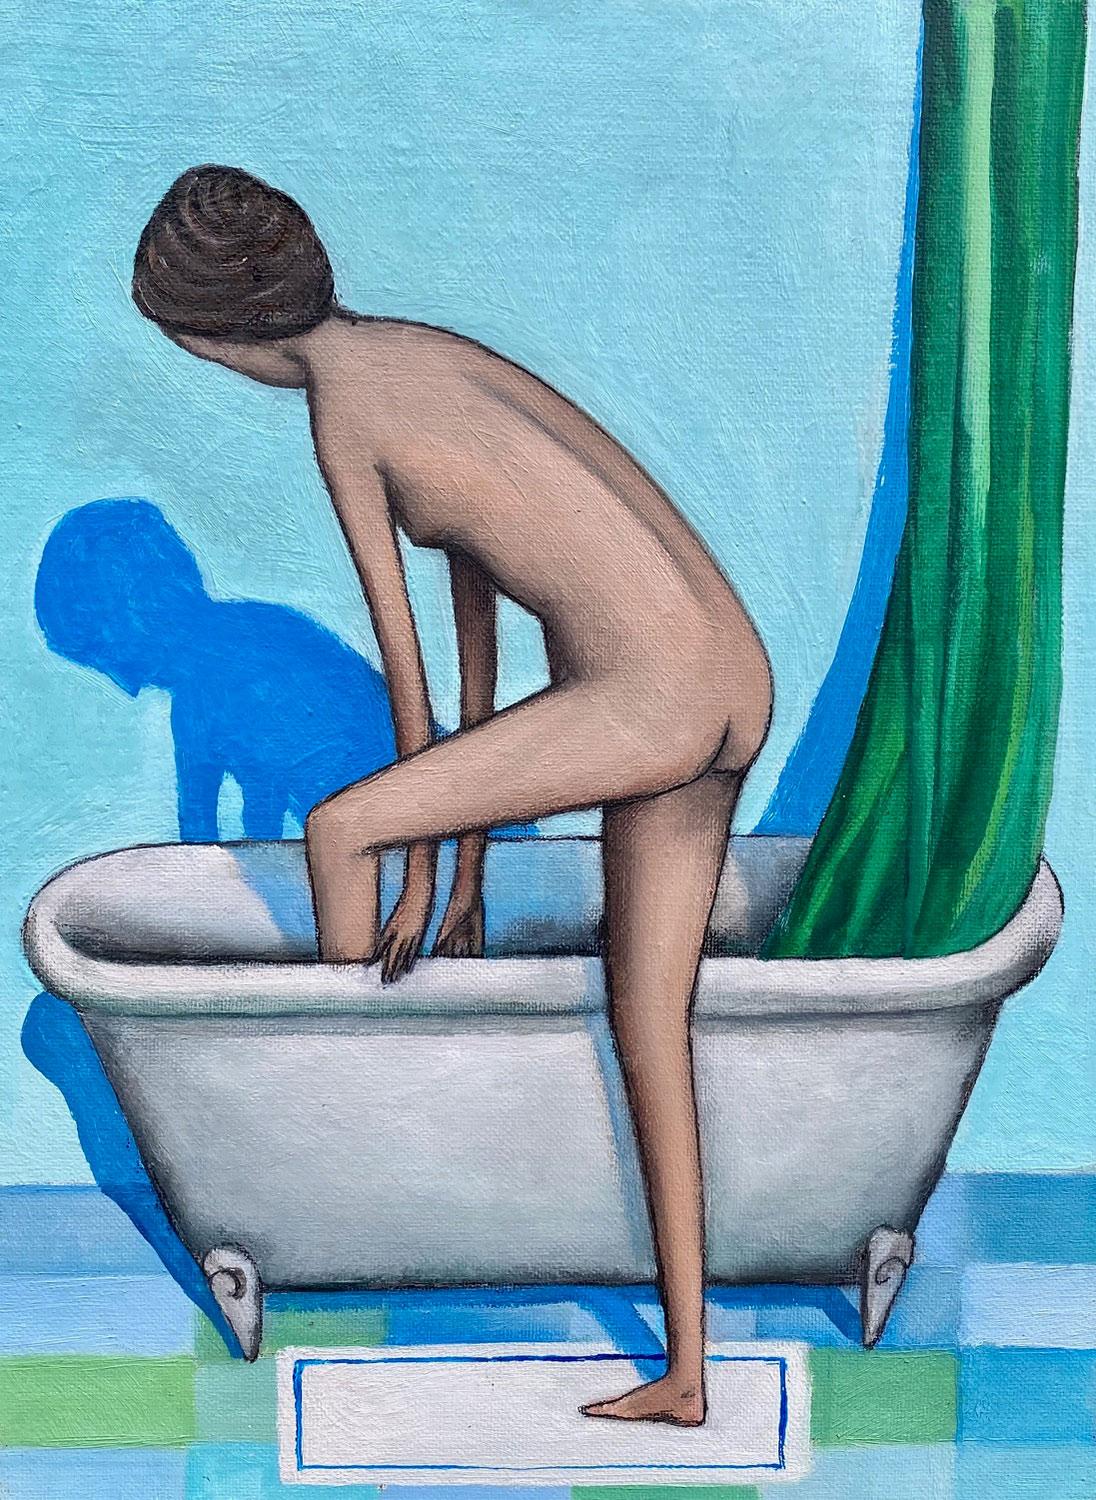 Giacomo Piussi Nude Painting - Woman Getting In Bathtub, Florence, Italy, 2019